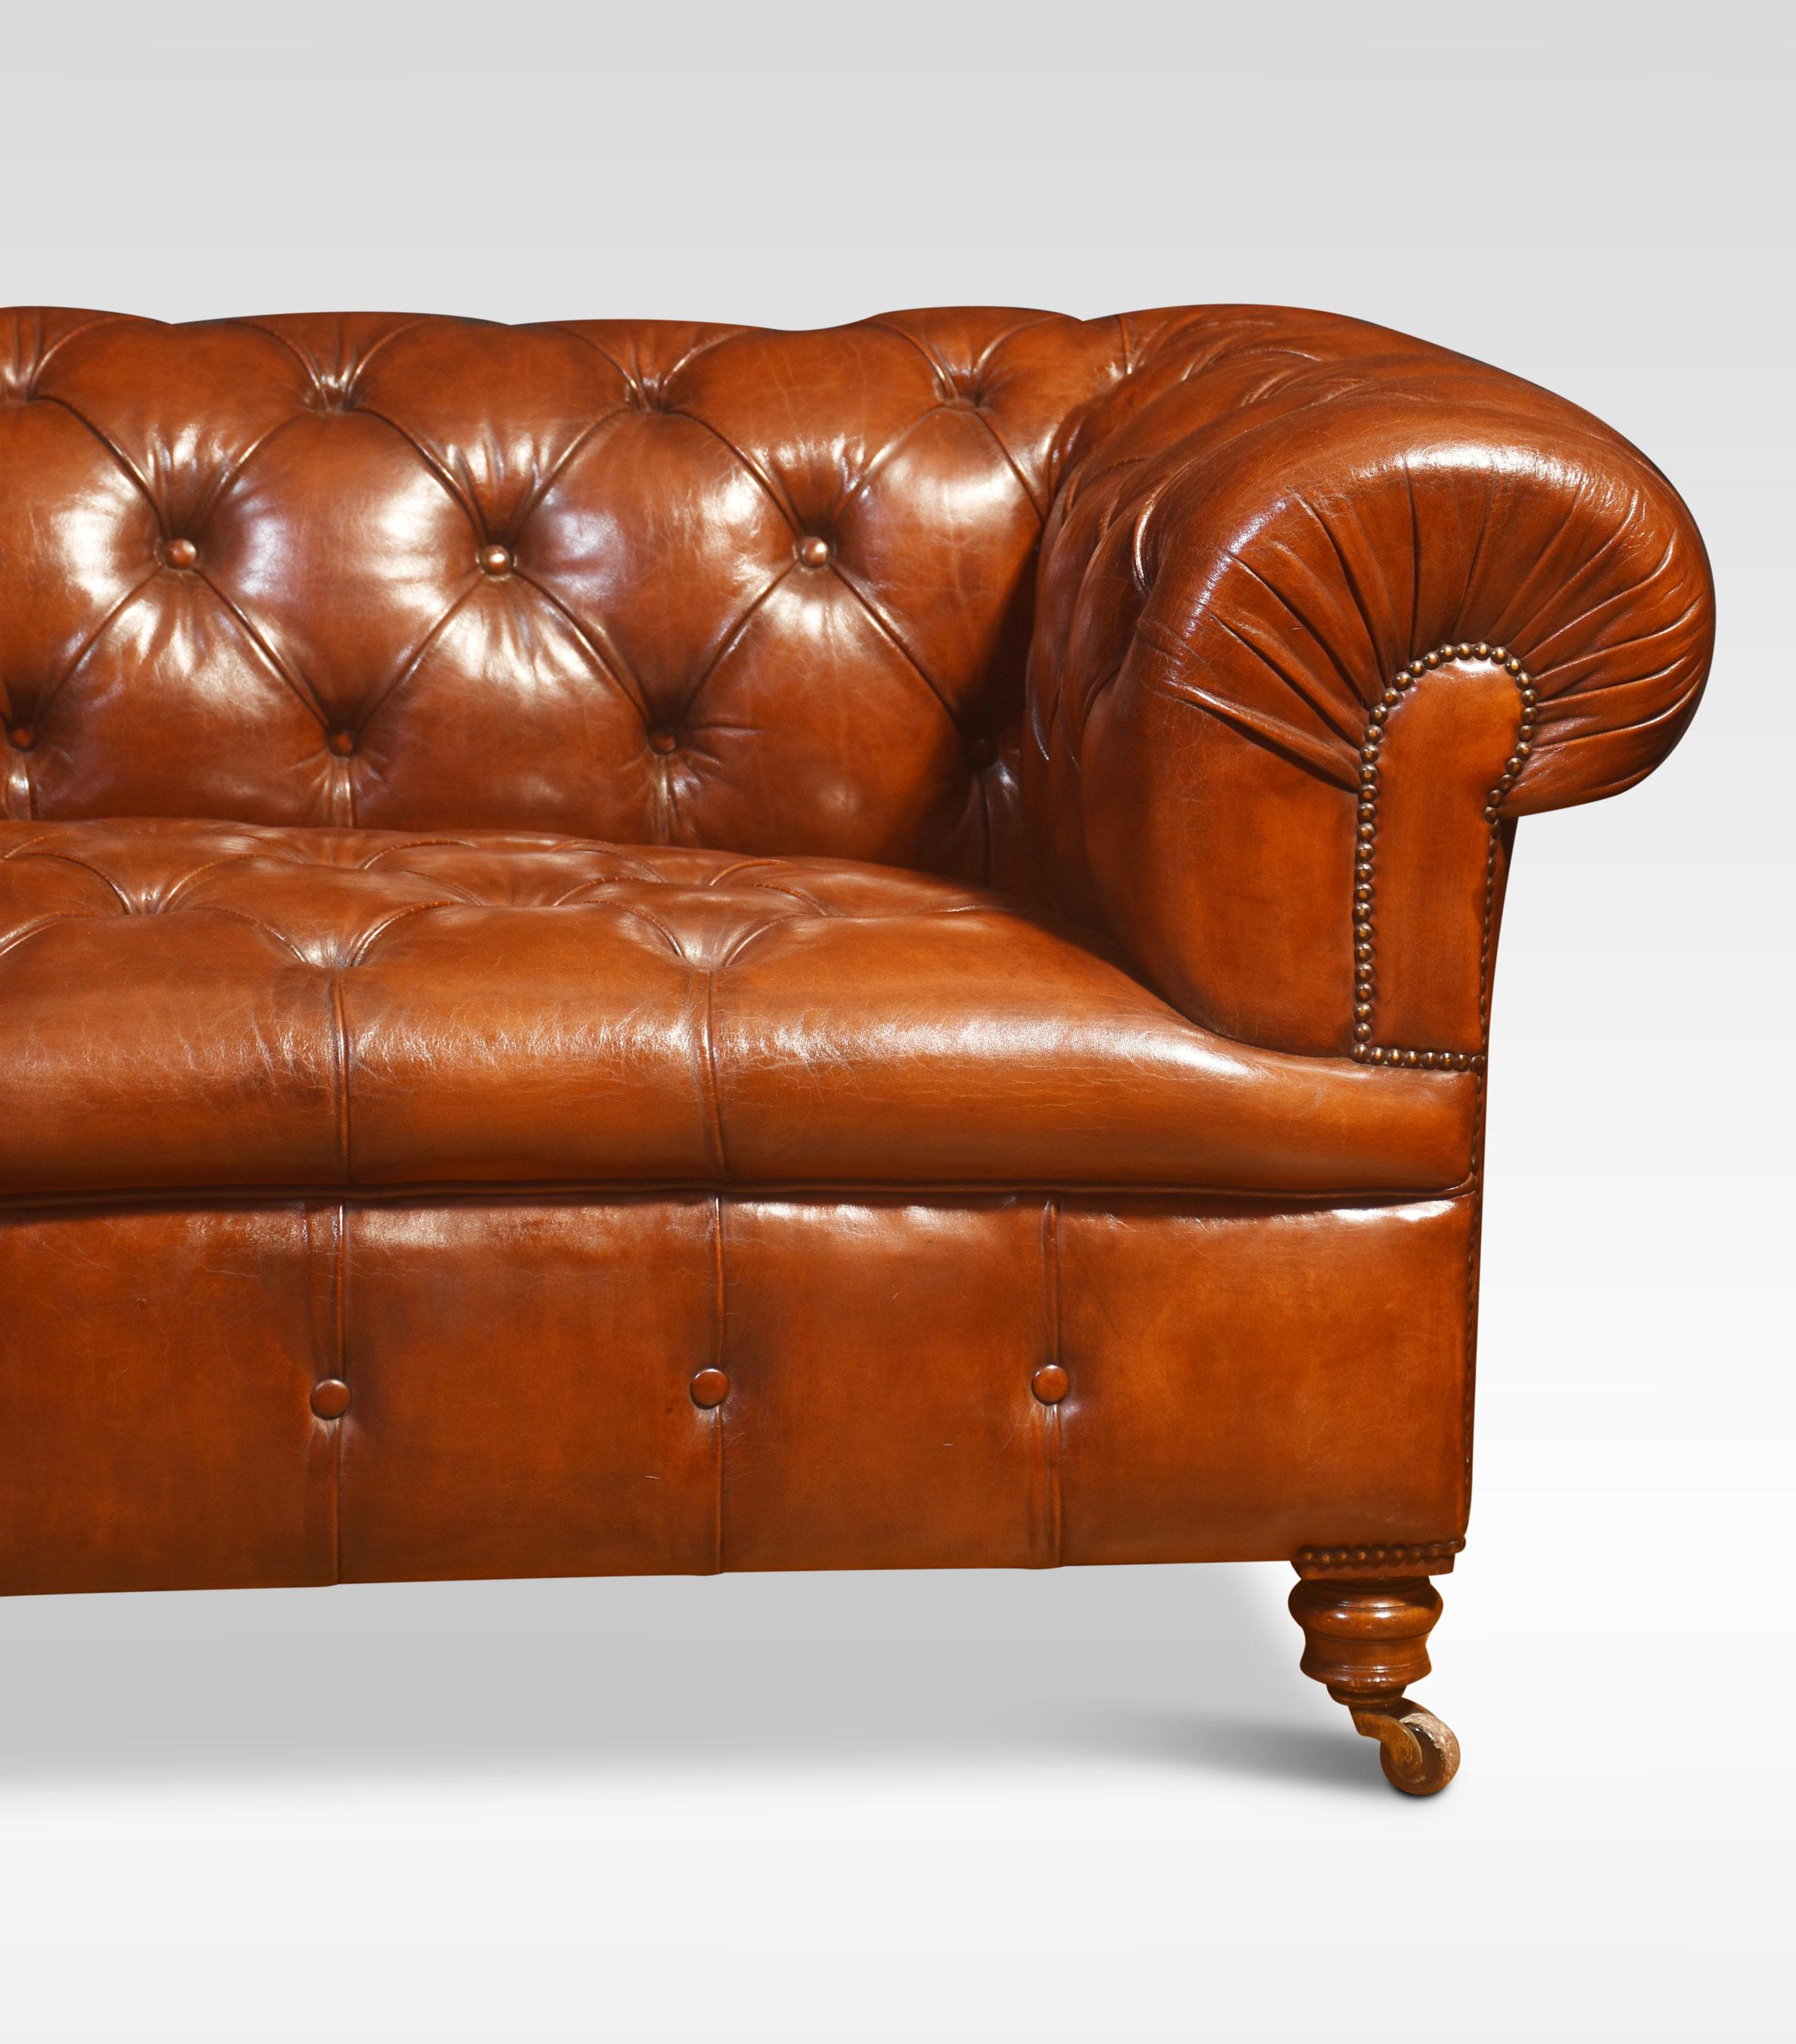 Large brown leather Chesterfield sofa, having deep buttoned back and seat, raised up on turned feet with brass ceramic castors. Good solid condition, the leather has been replaced and hand-dyed.
Dimensions
Height 29 Inches height to seat 17.5